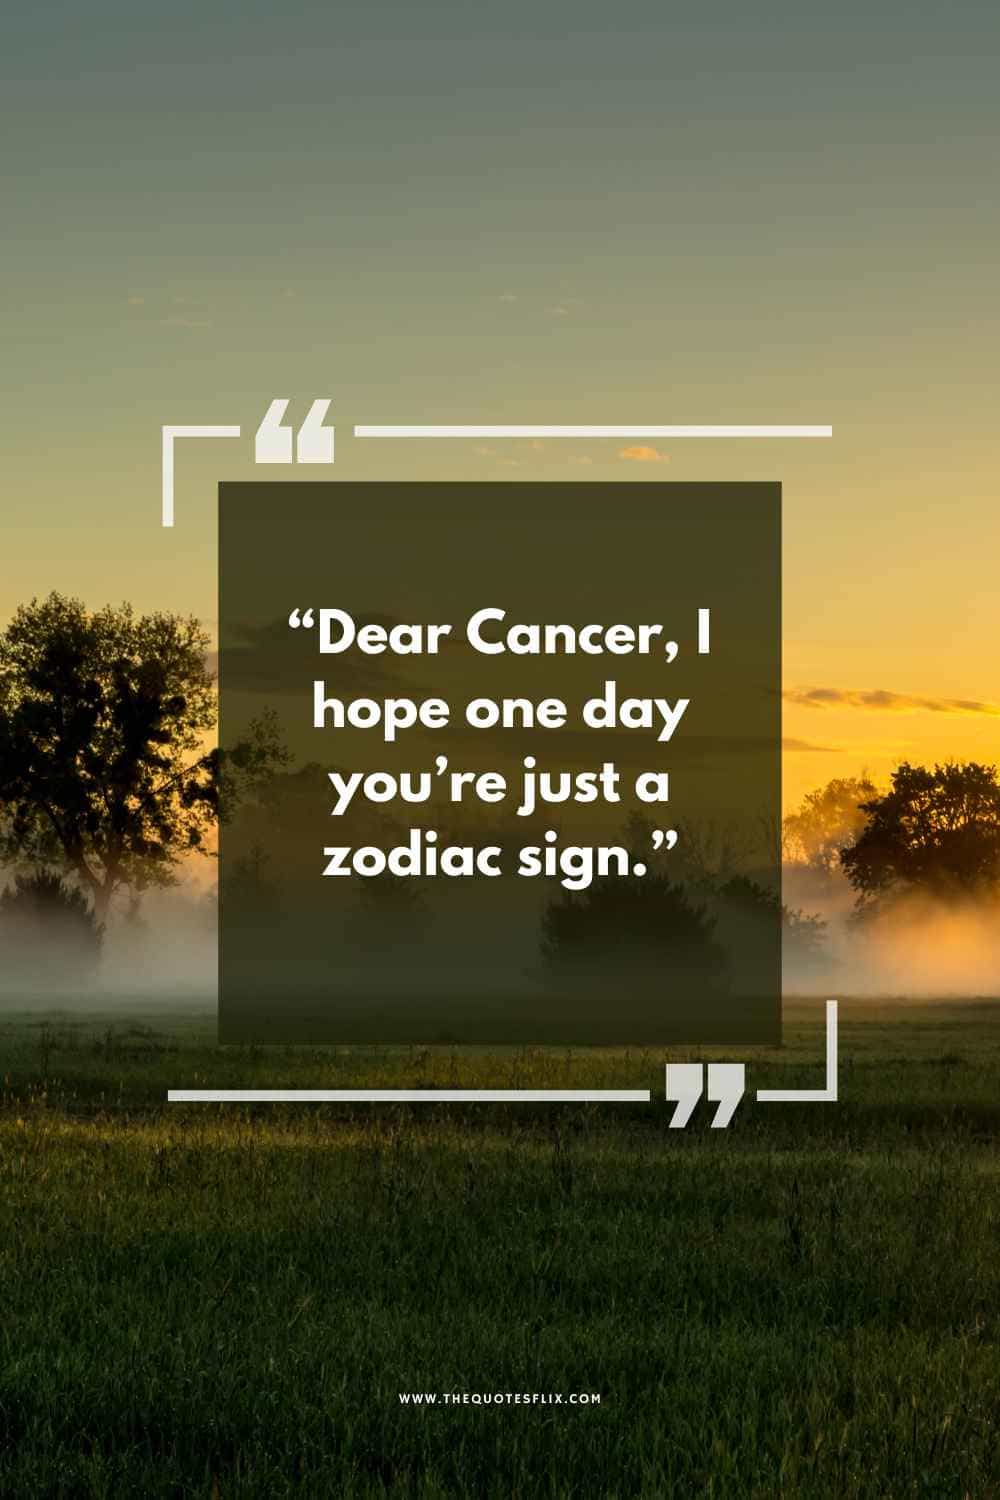 inspiratioinal cancer quotes - dear cancer hope one day youre just zodiac sign